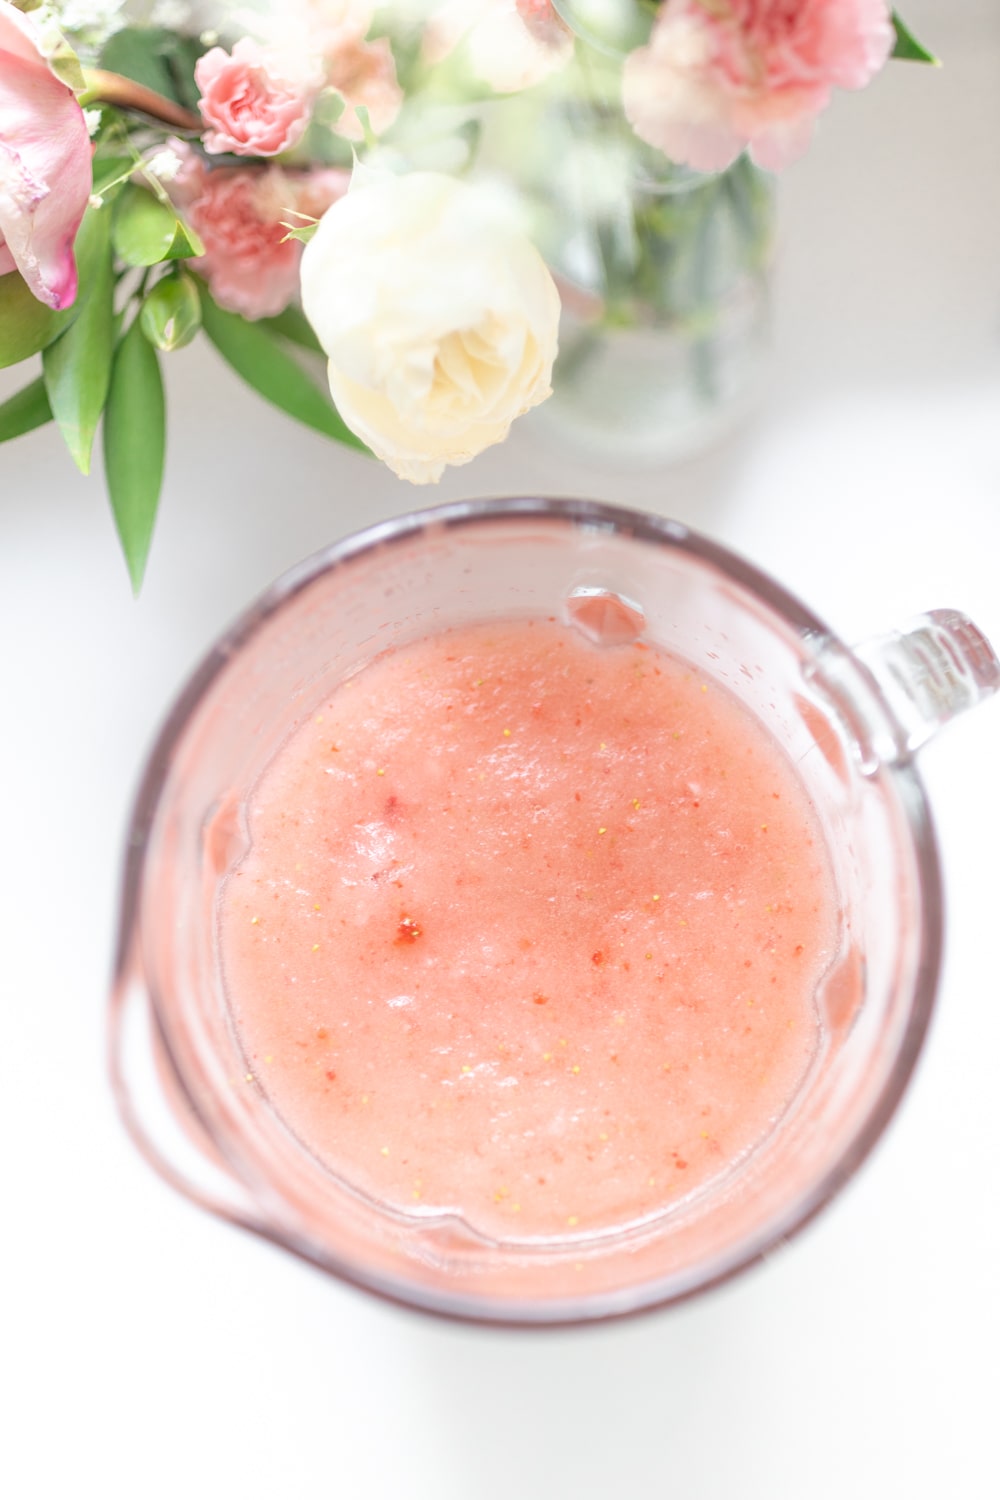 Strawberry frose recipe created by blogger Stephanie Ziajka on Diary of a Debutante